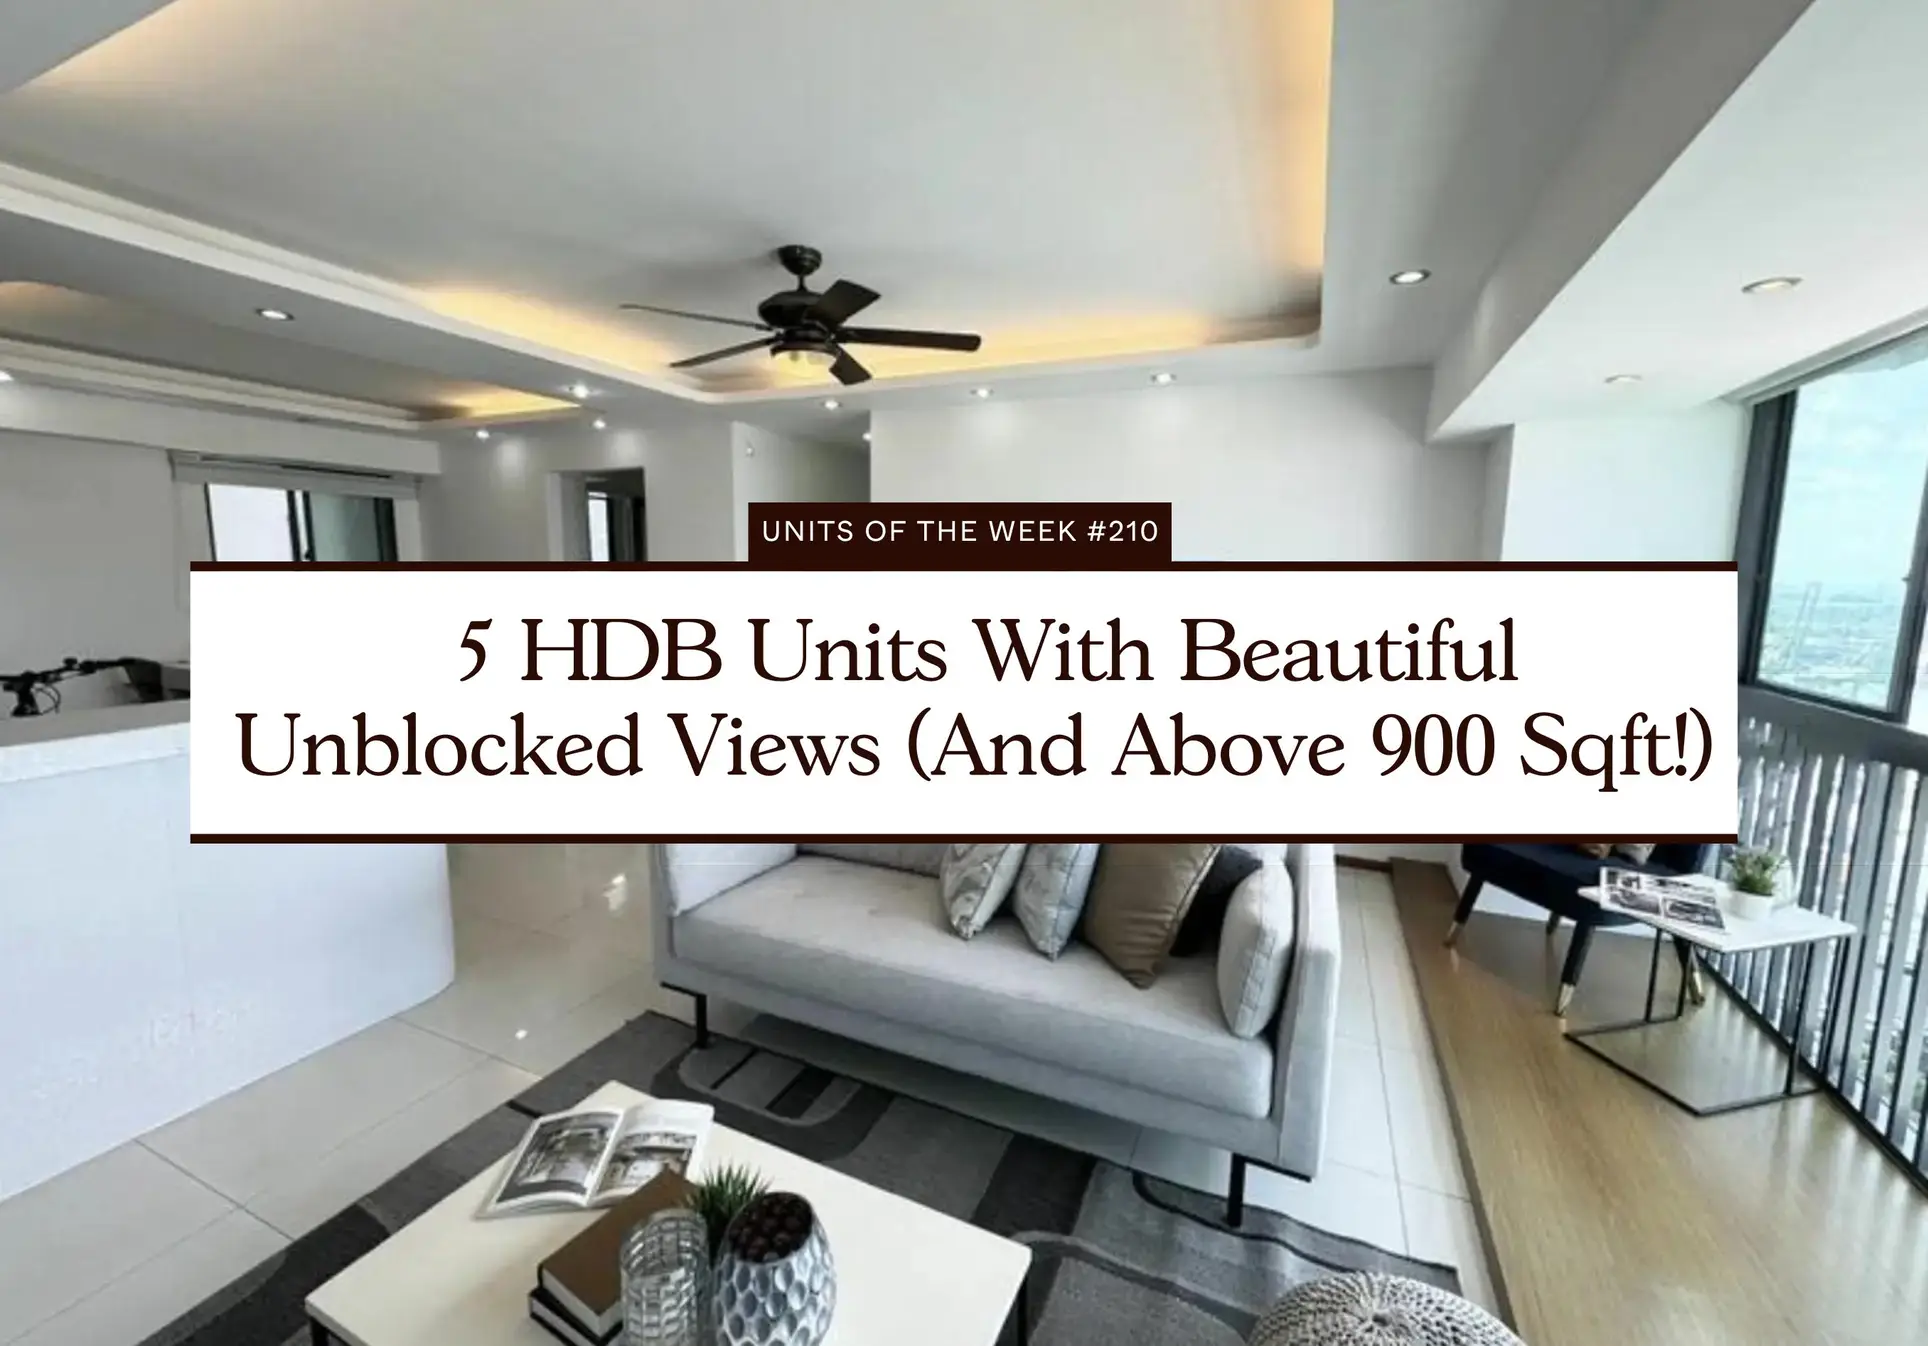 5 HDBs with Beautiful Unblocked Views (and Above 900 SQFT!)